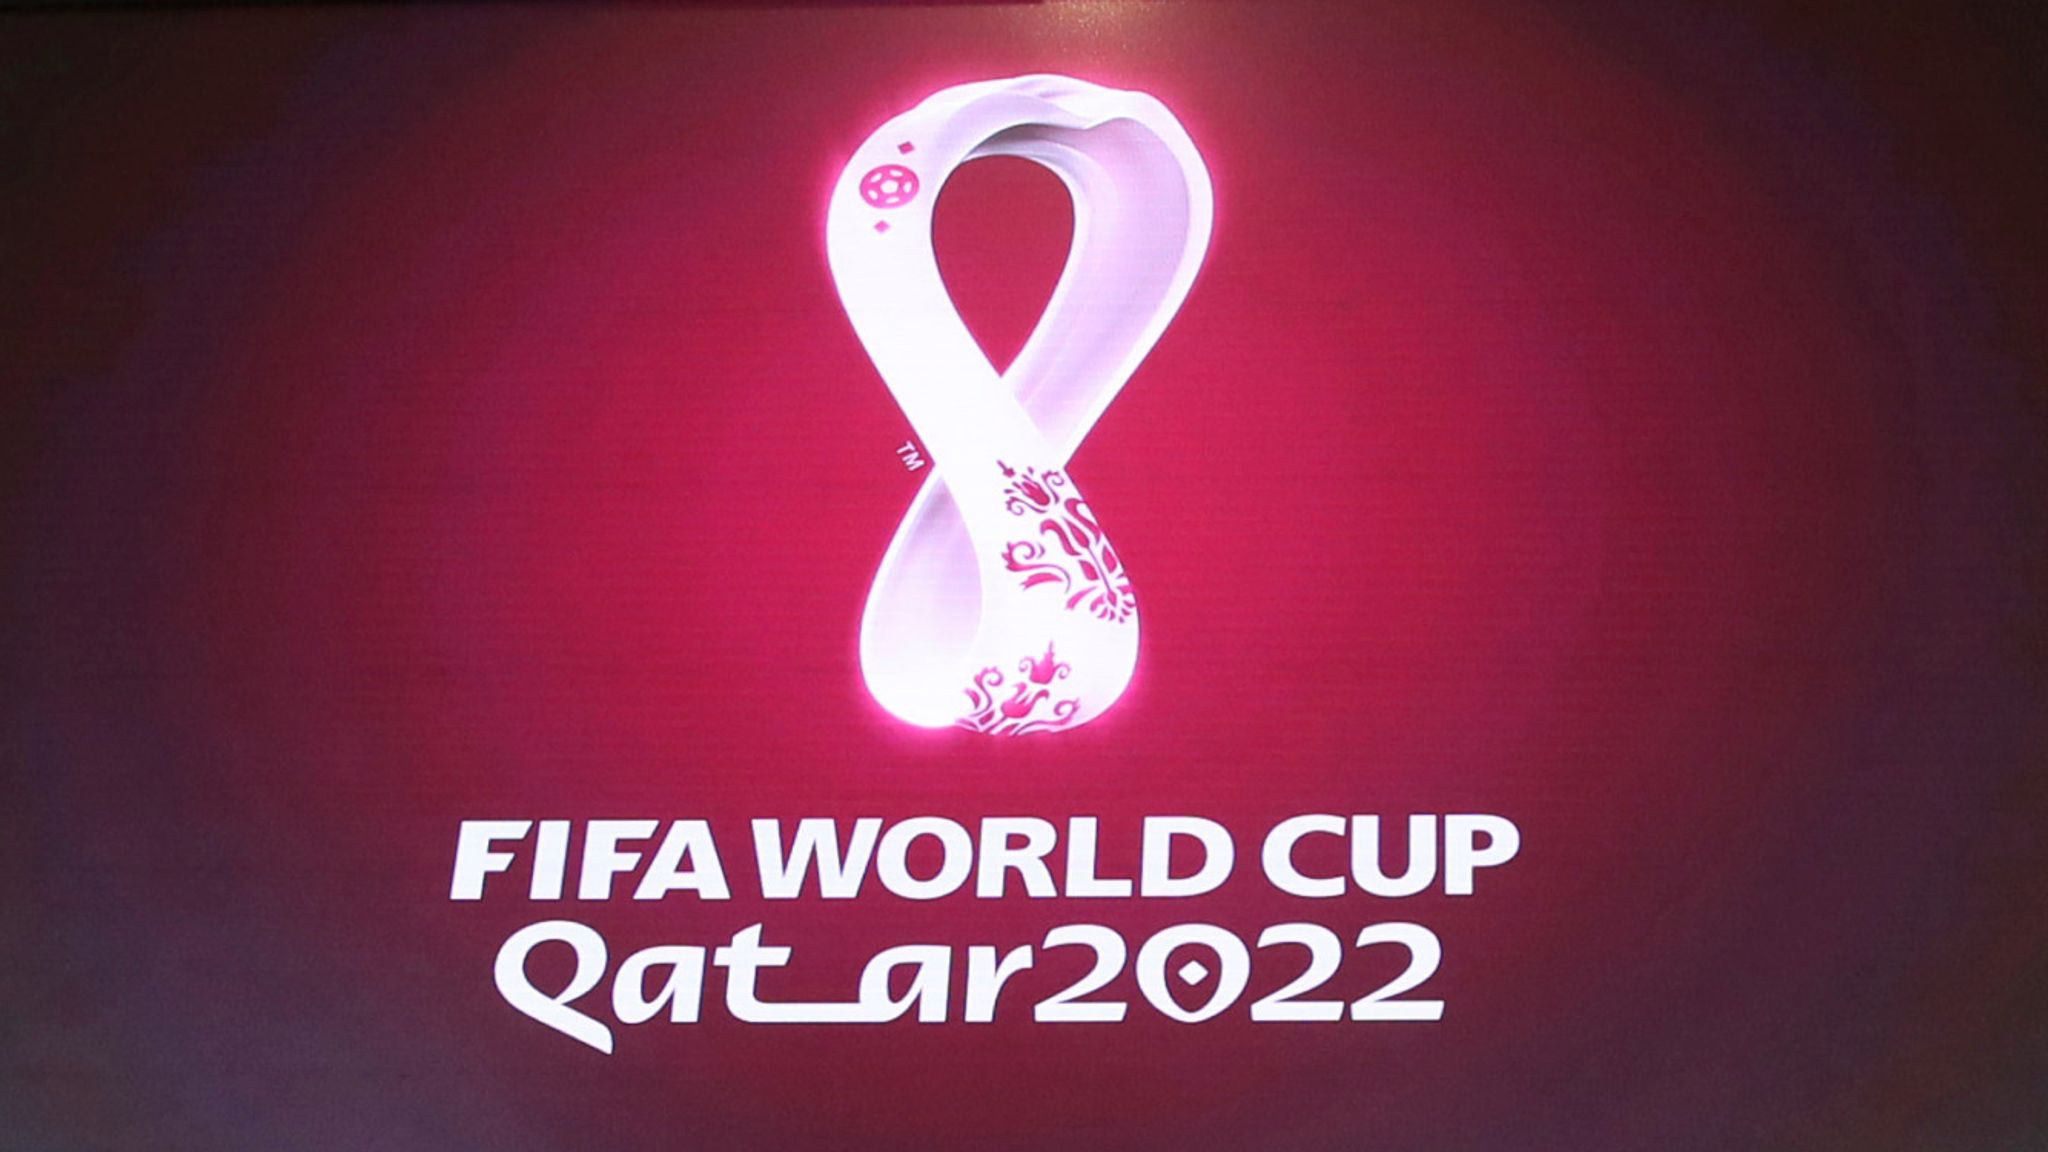 Premier League to resume on Boxing Day 2022 after break for Qatar World Cup from November 13